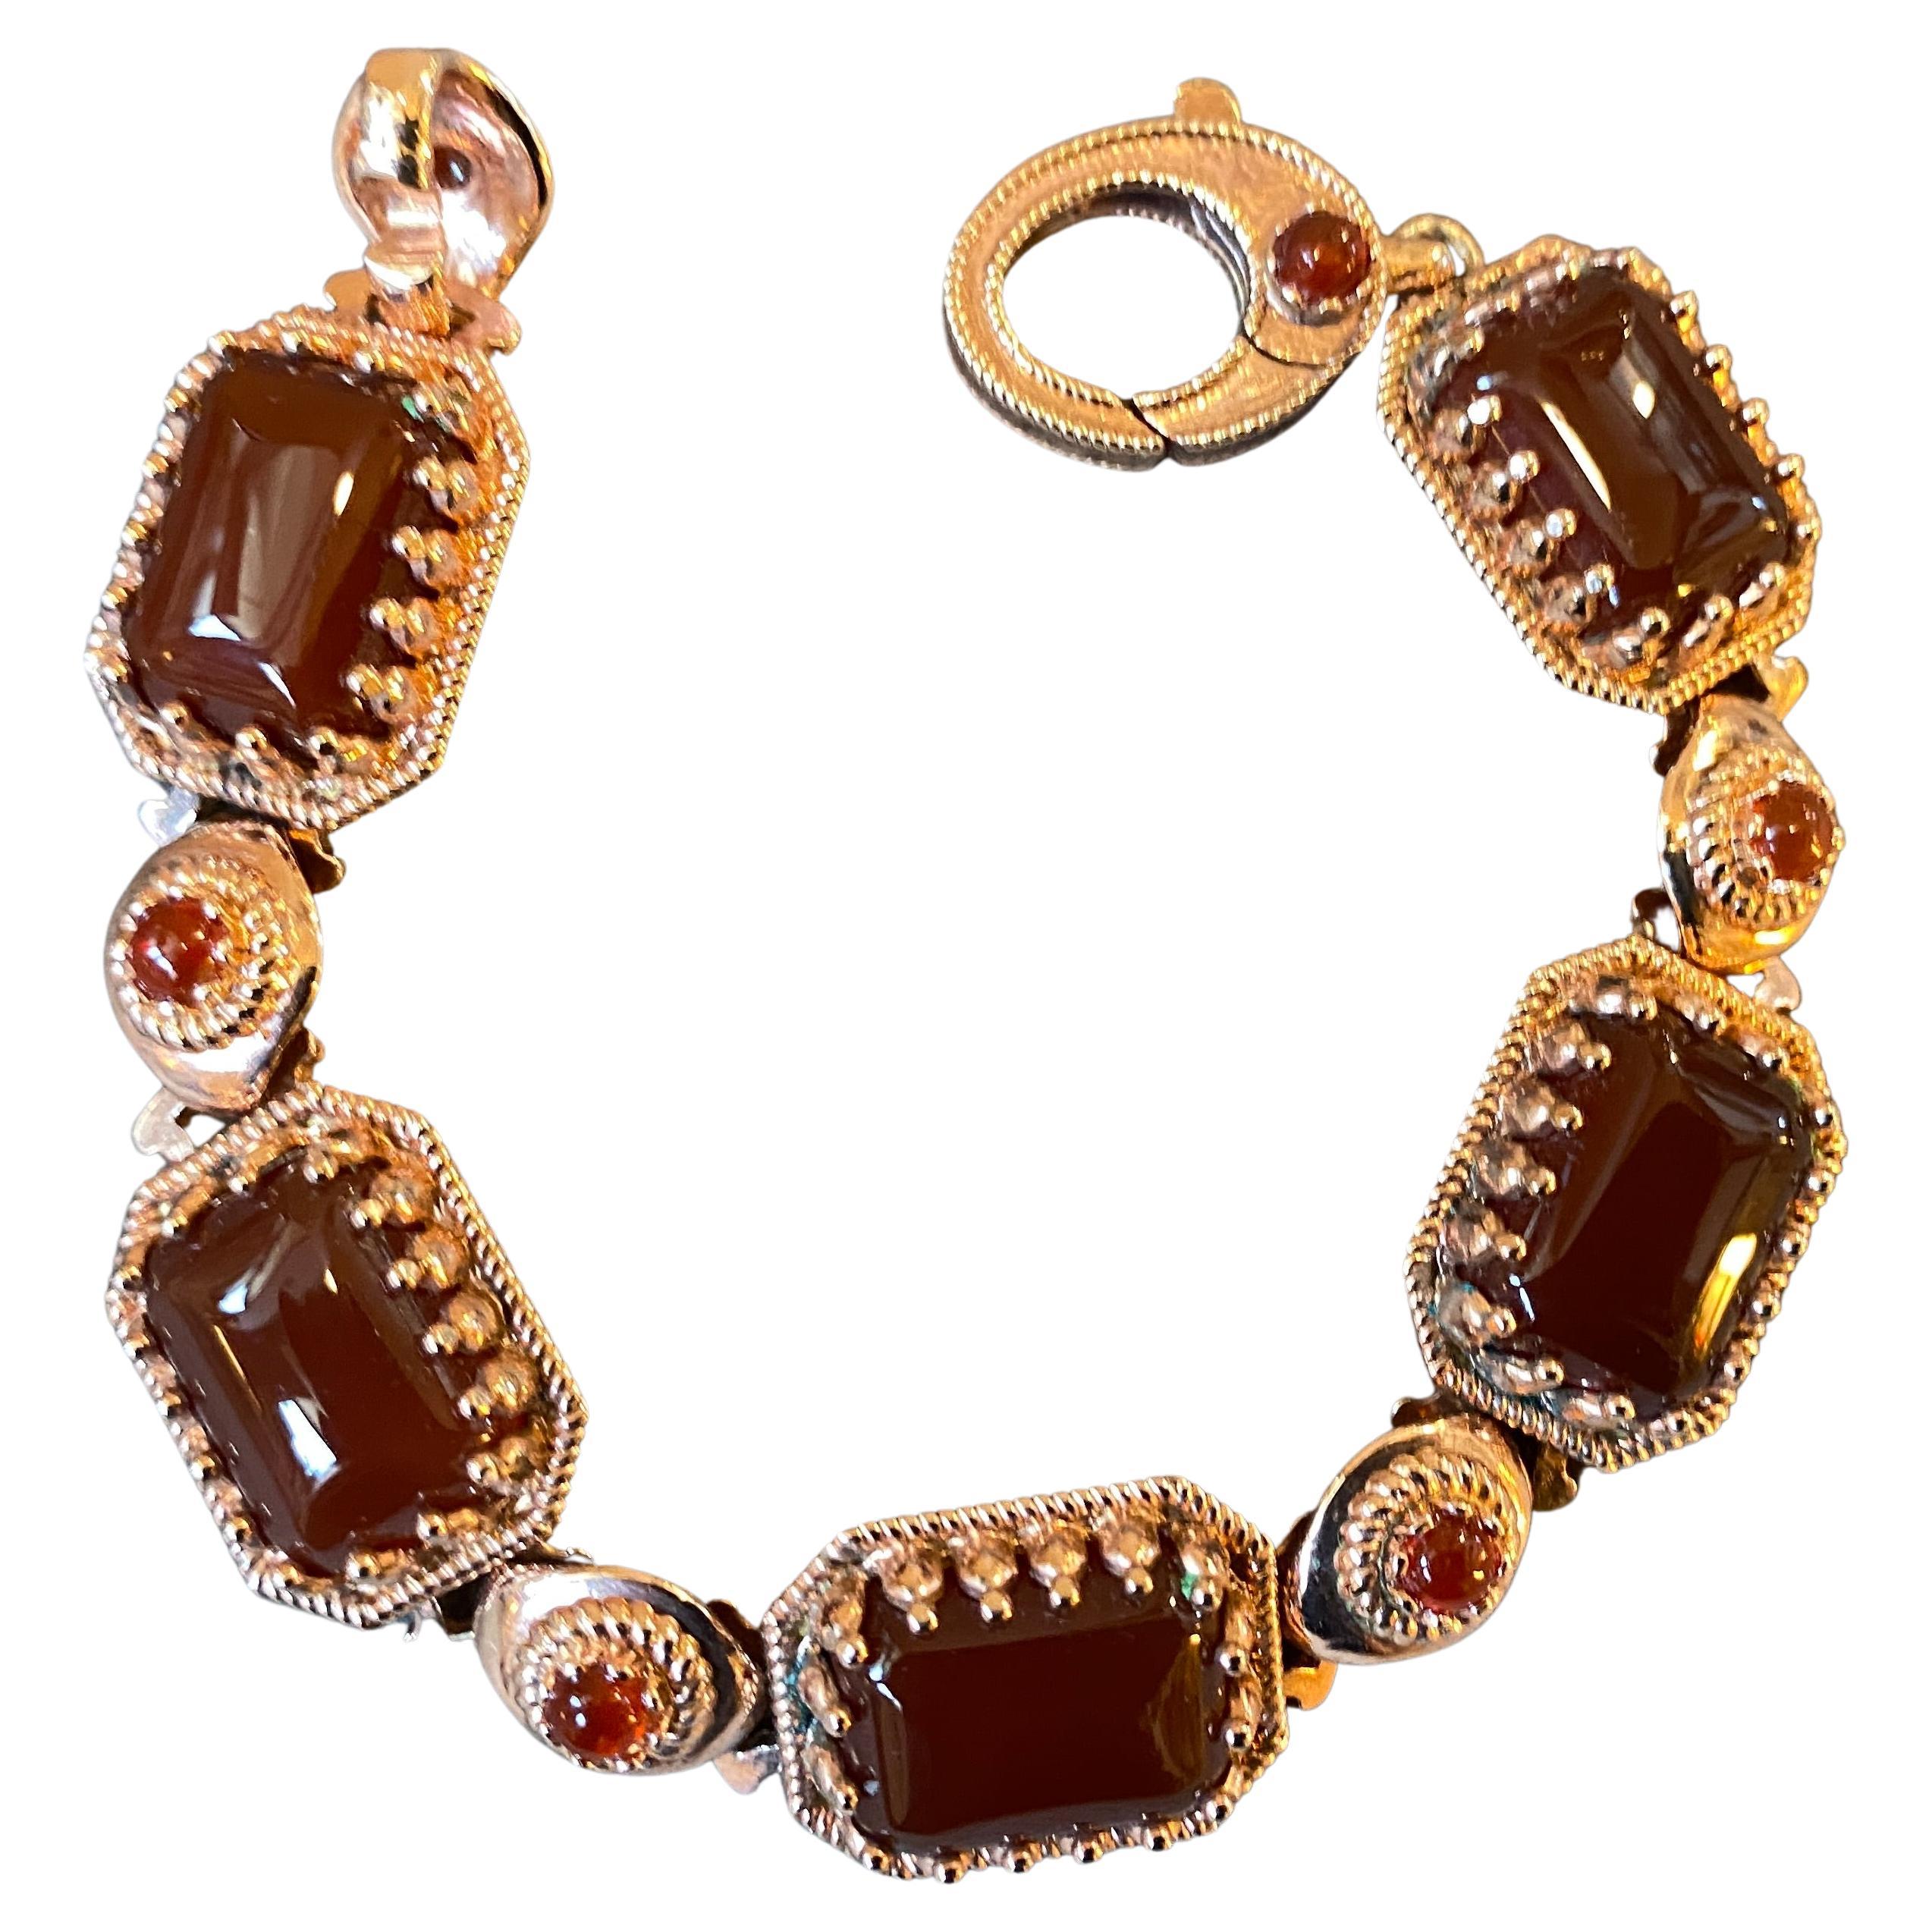 An amazing bracelet made in Italy in the Nineties, it's in perfect condition probably never worn. High quality bronze and cabochon carnelian gives it a jewel look.